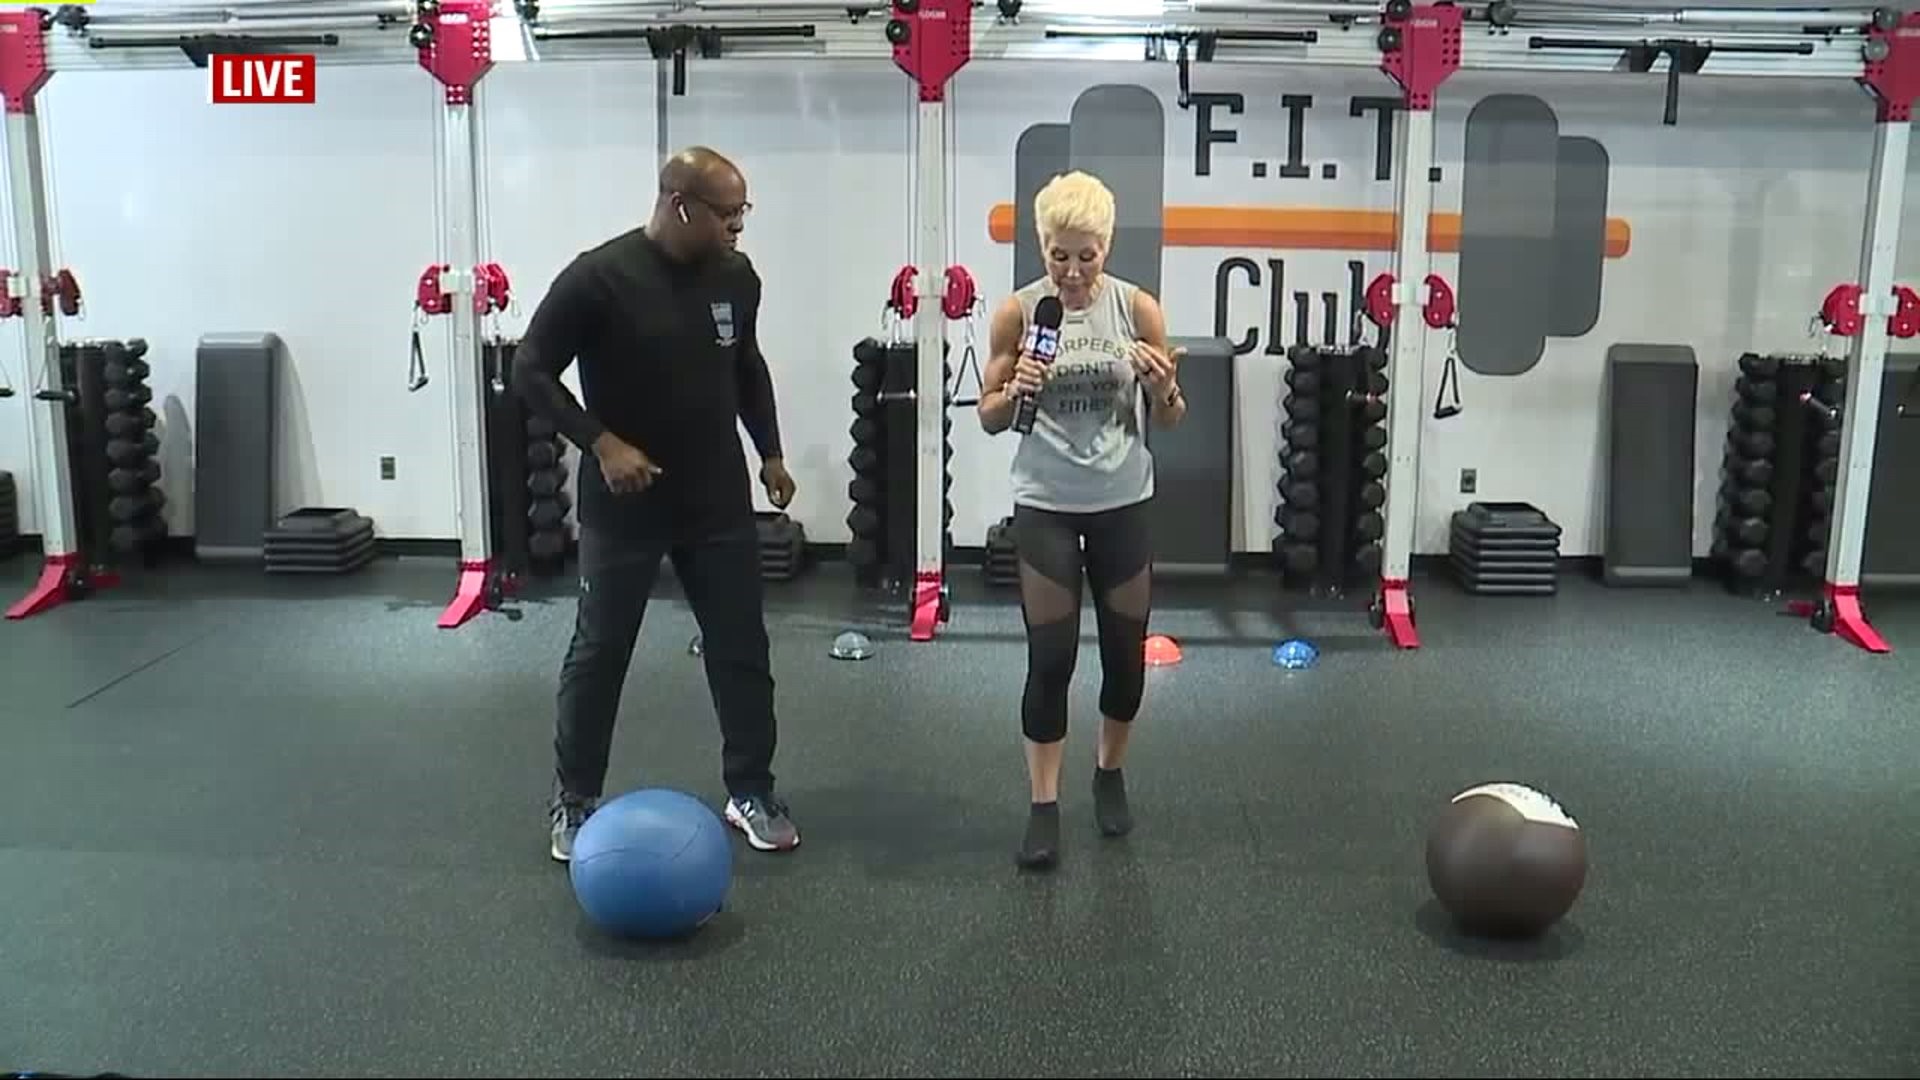 BE WELL LIVE with Chris and Mindy - Full Body Workout